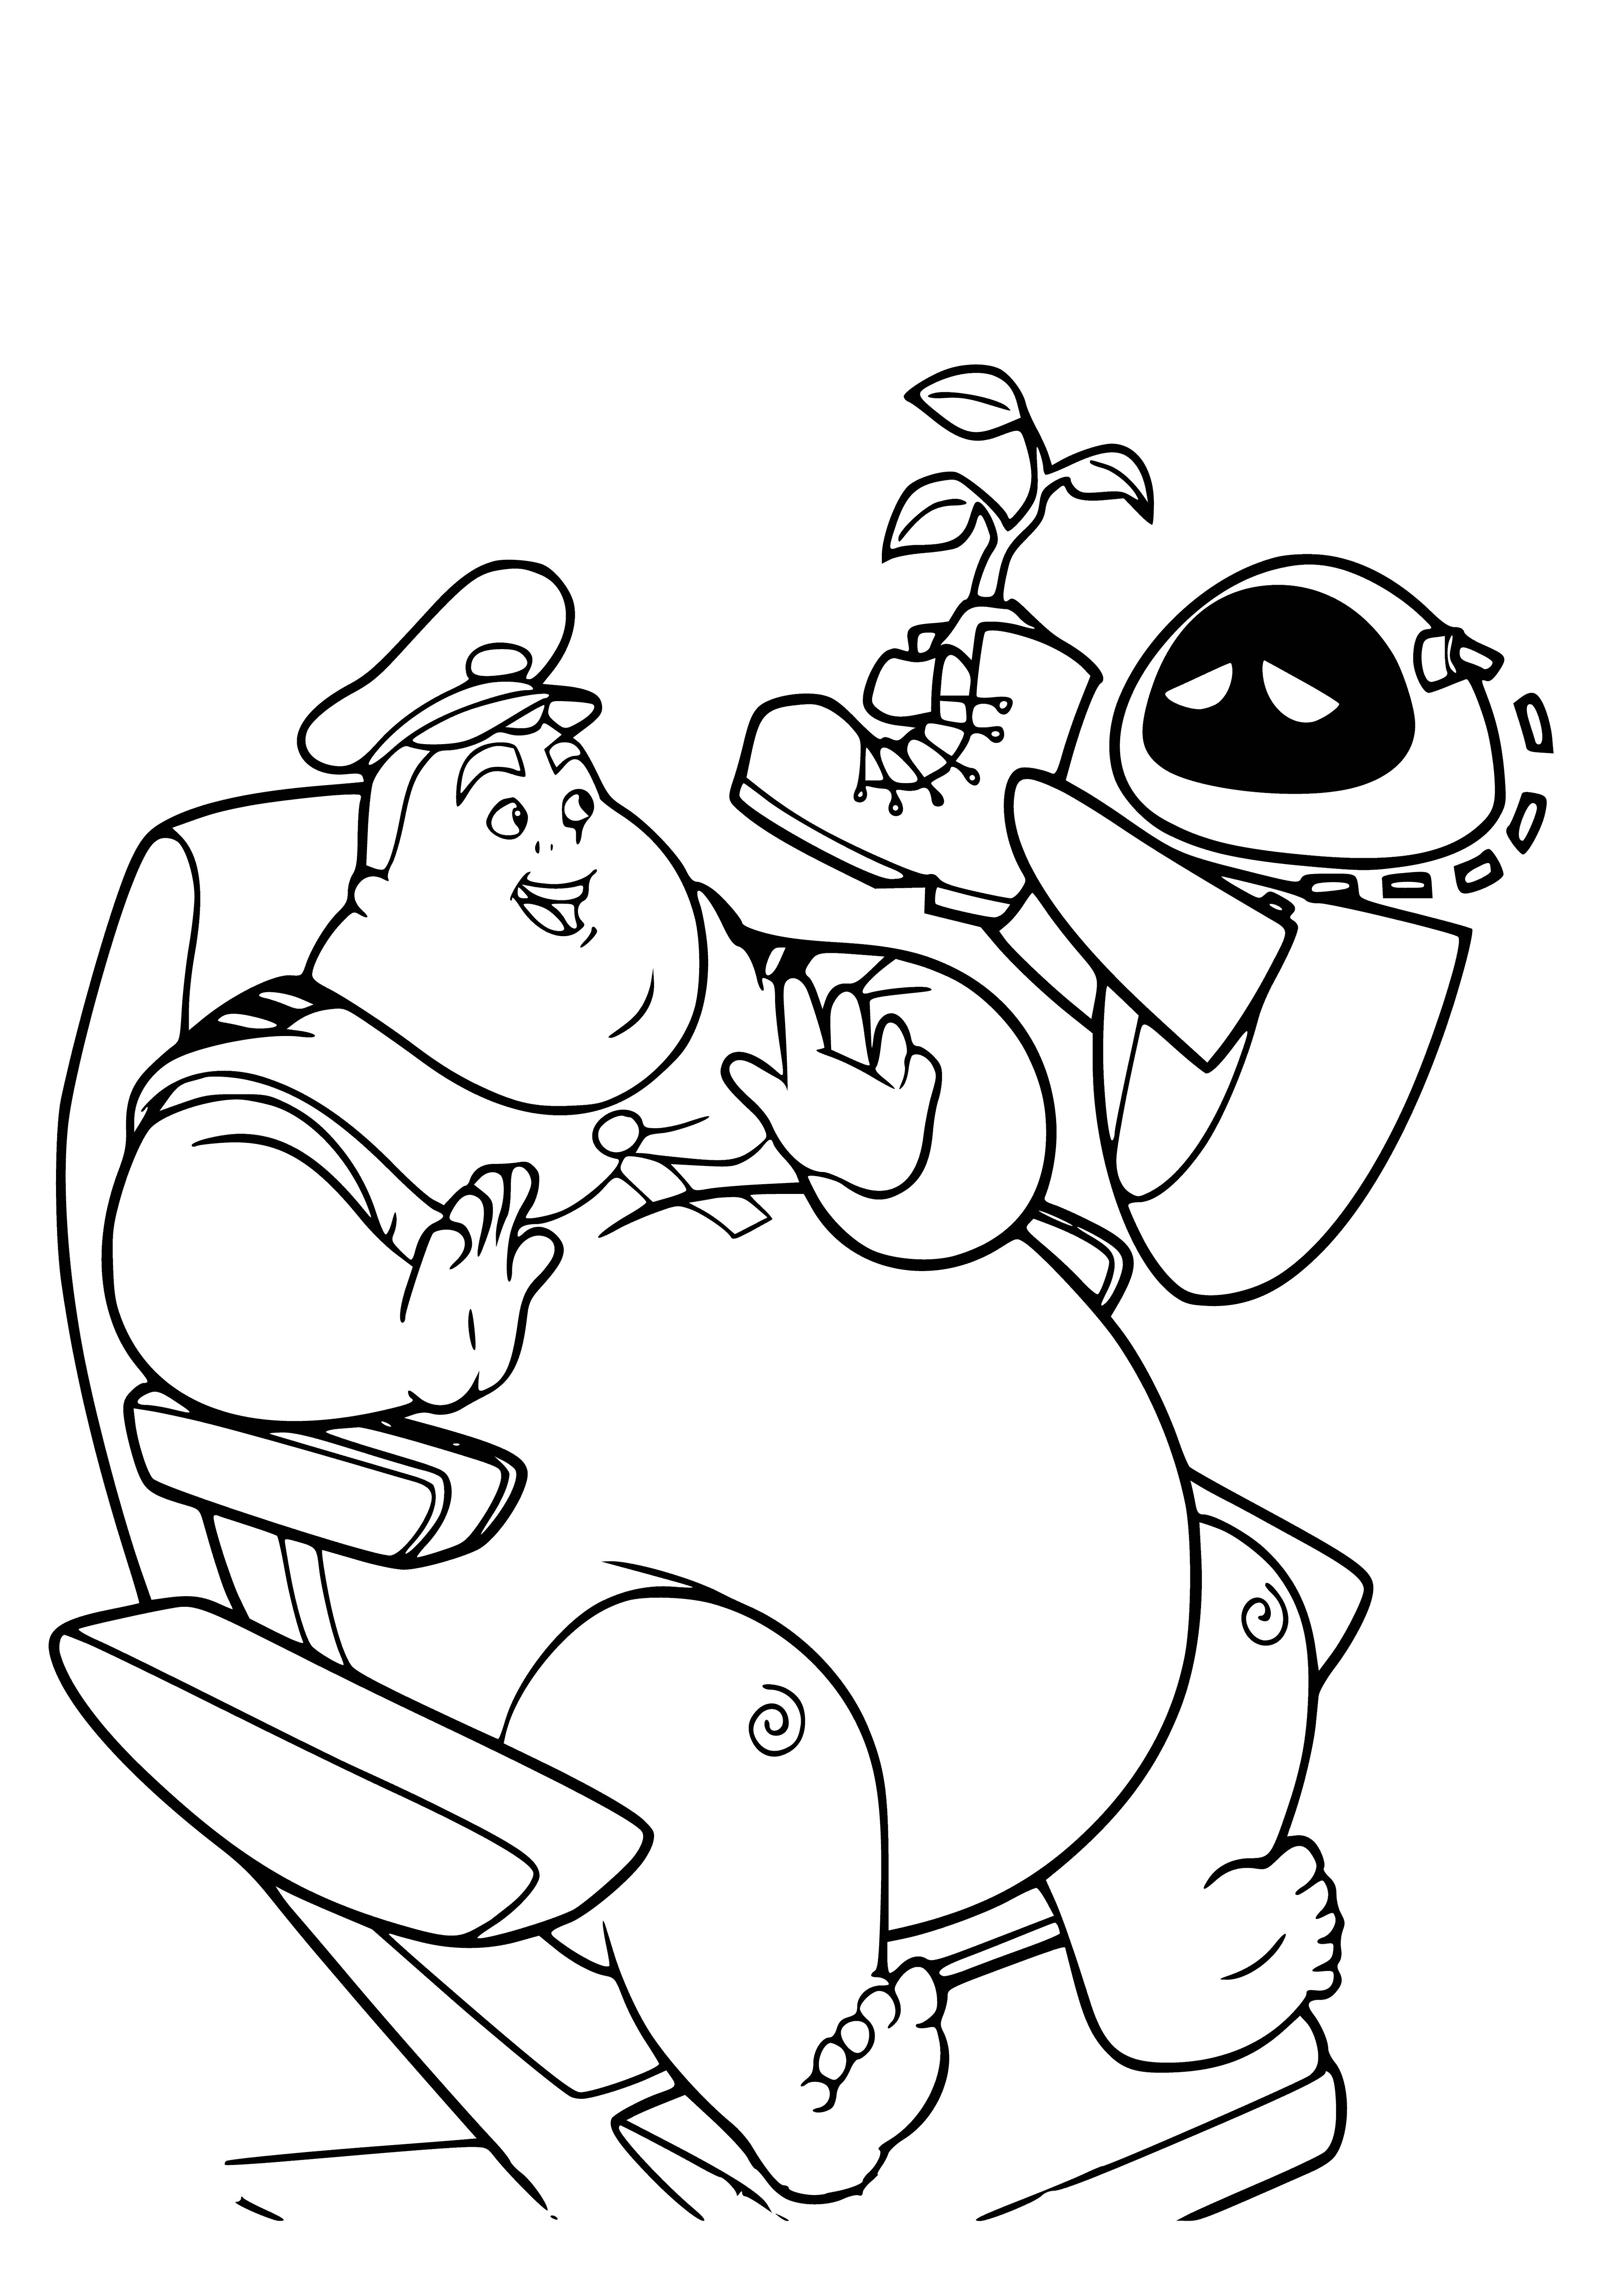 Captain and Eva coloring page